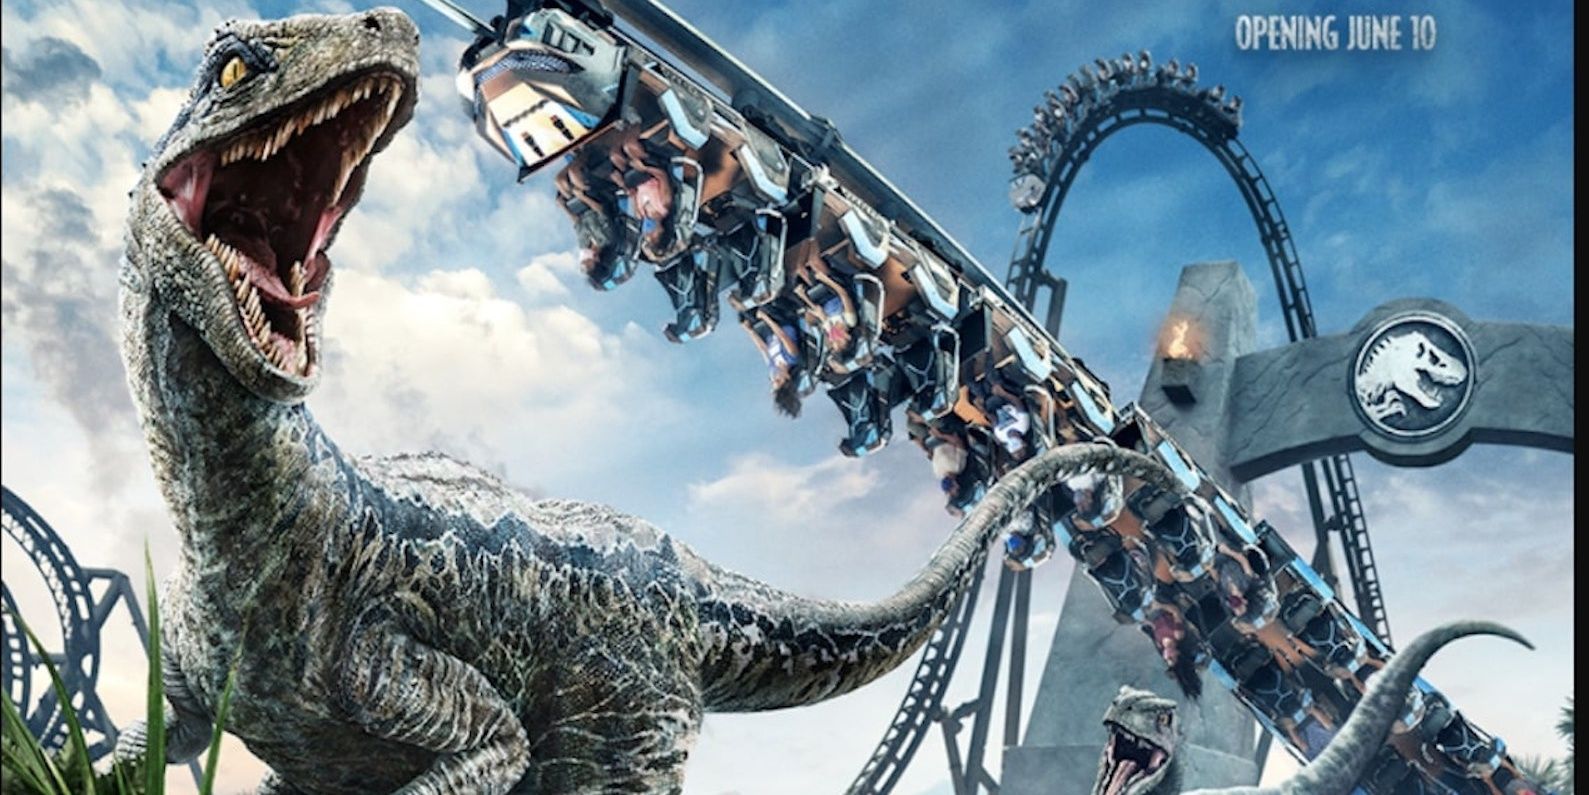 Advertisement featuring raptor and upside down rollercoaster at Universal Islands Of Adventure